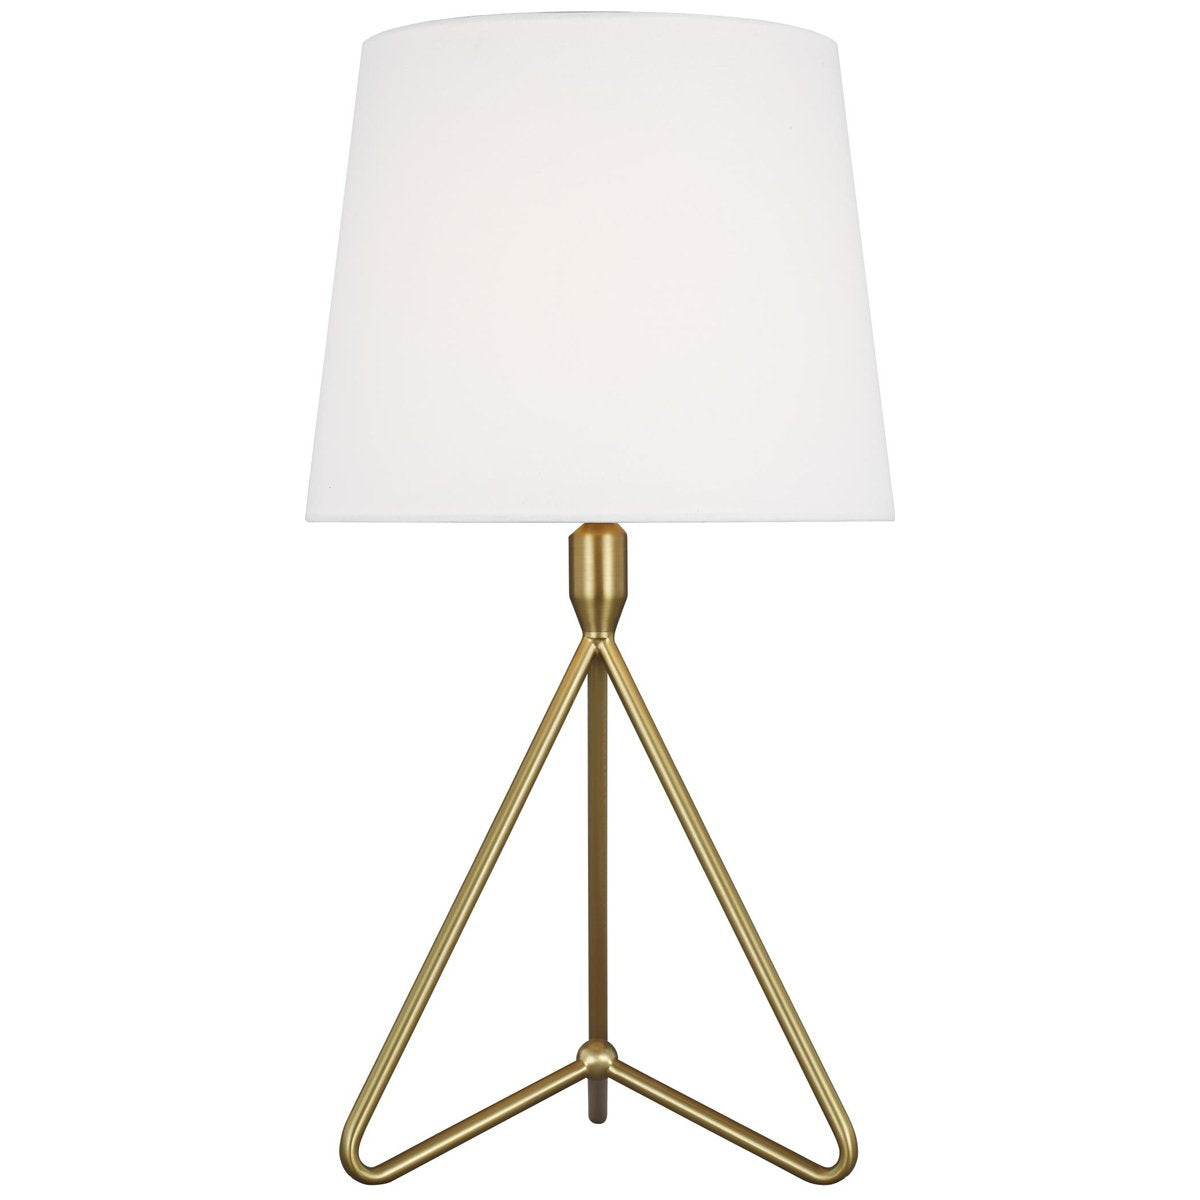 Feiss Dylan Table Lamp